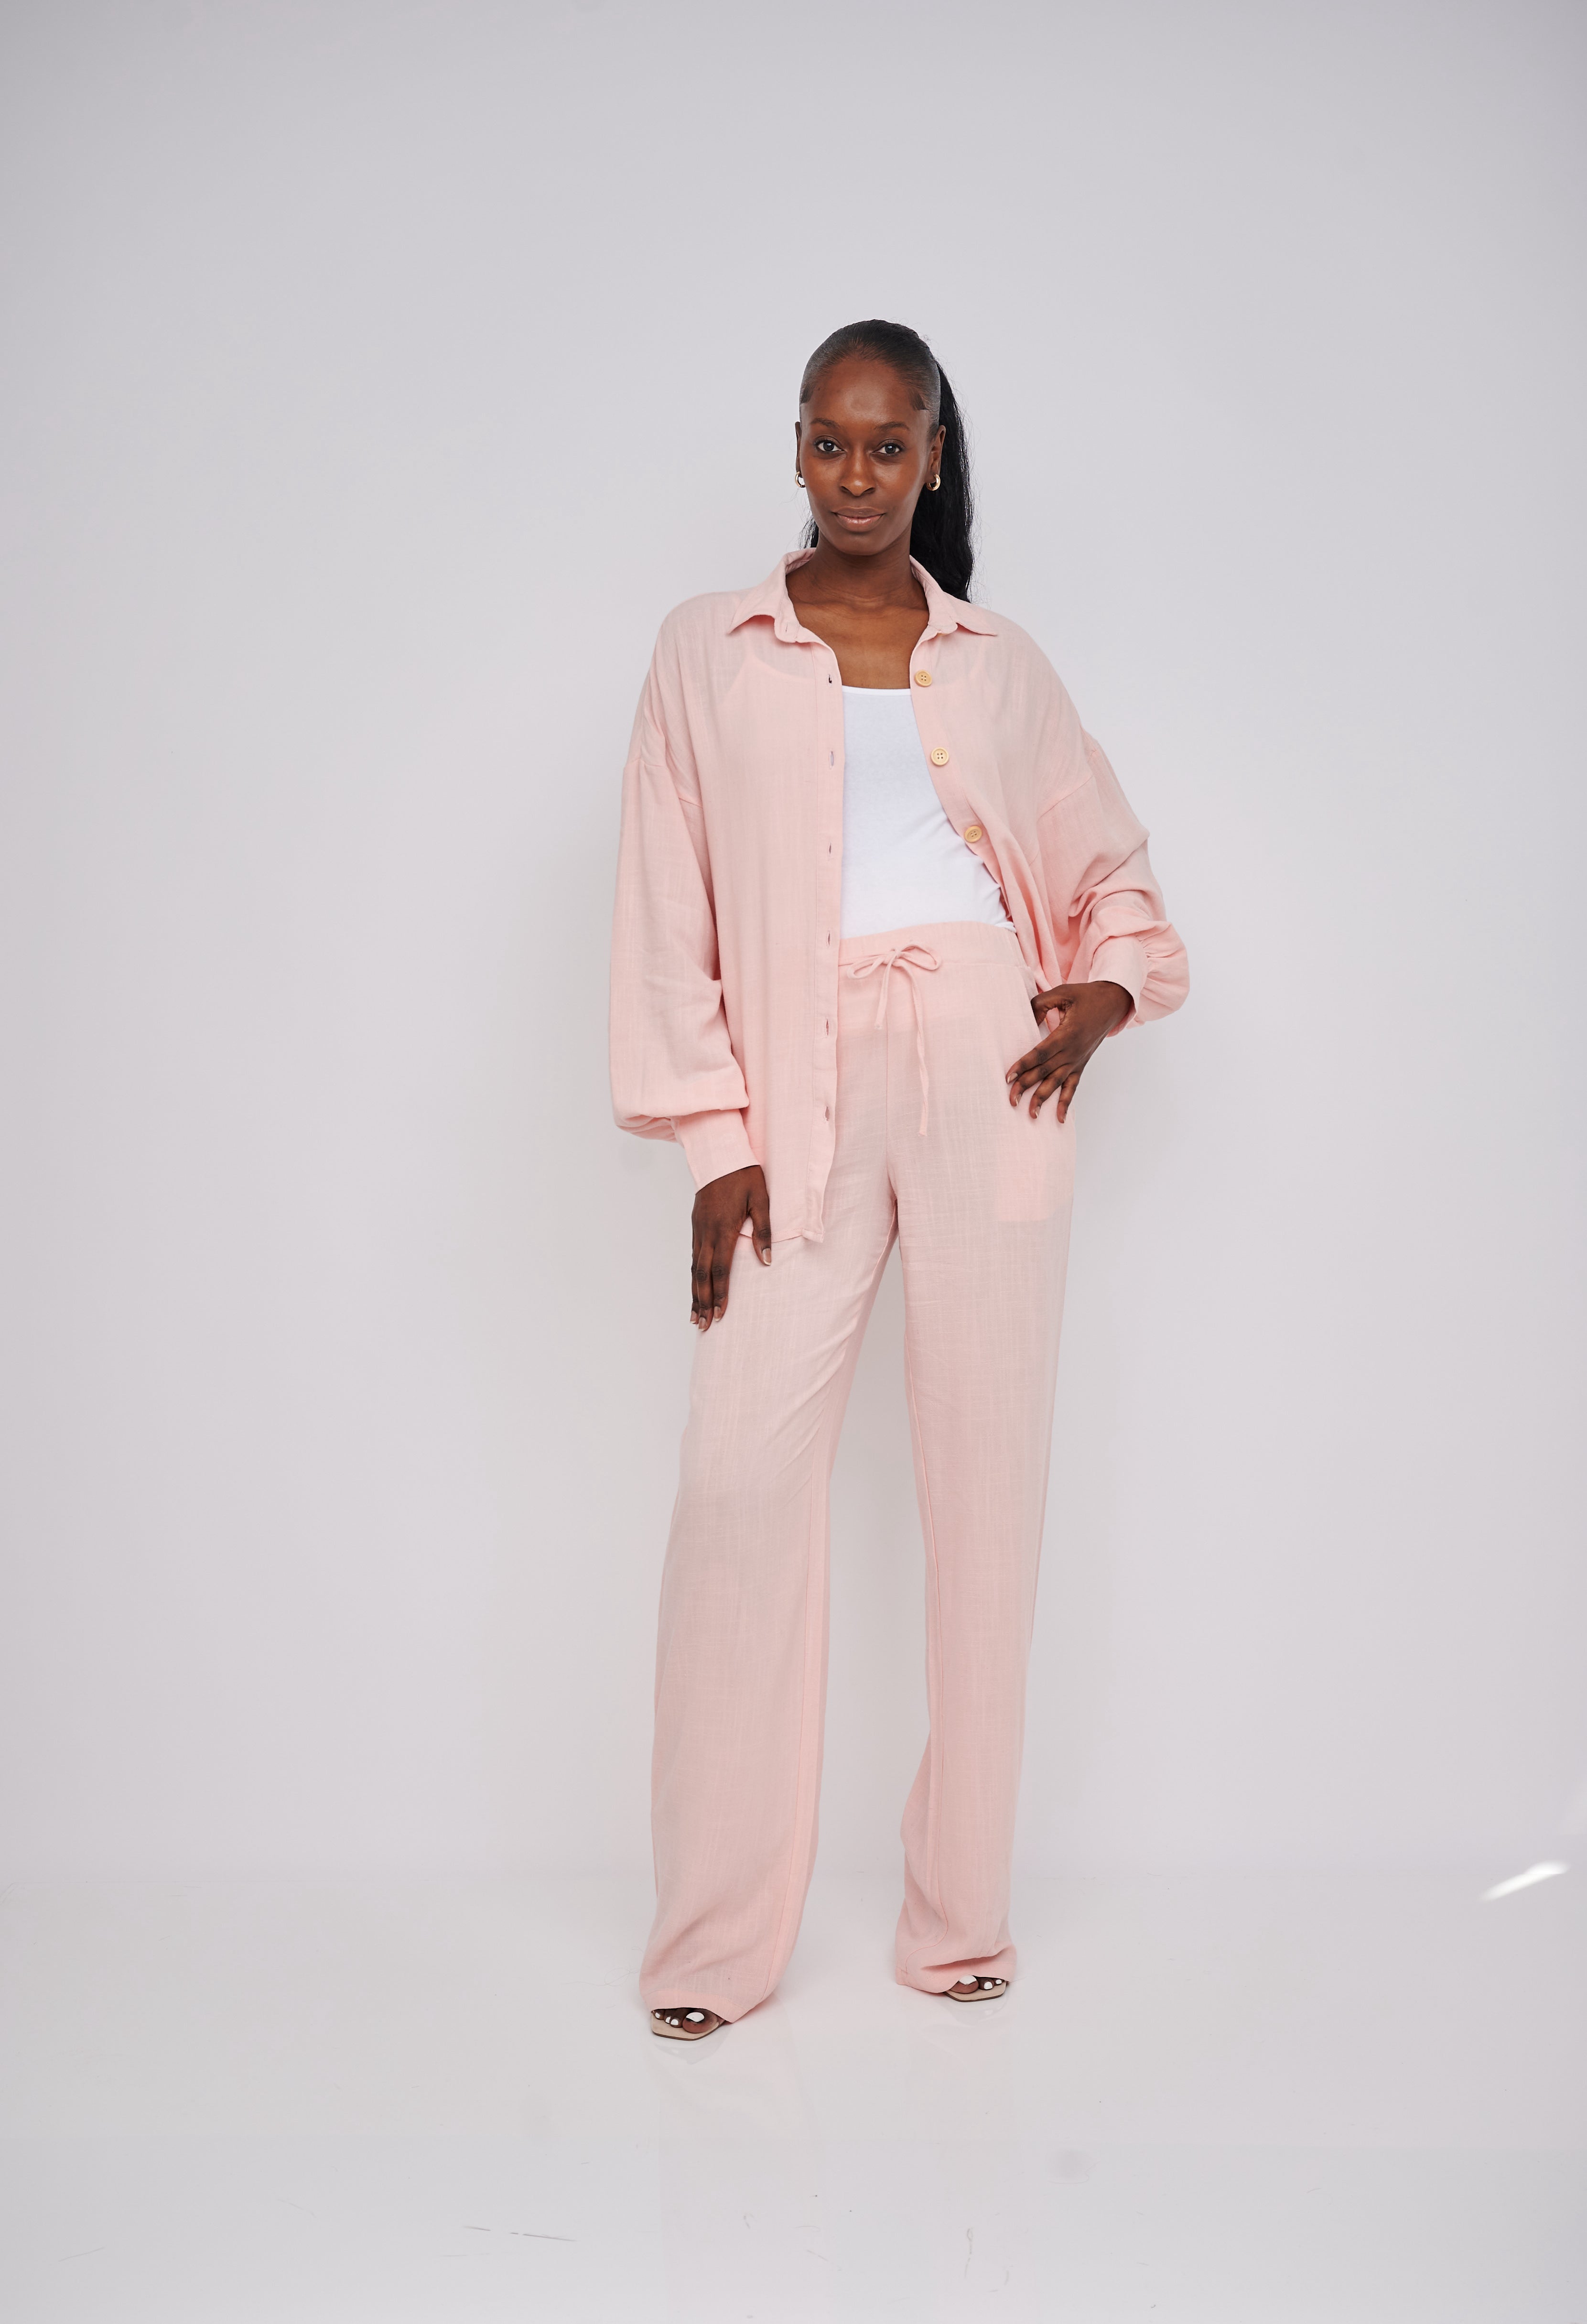 Femme Luxe tailored trousers co ord in light pink | ASOS